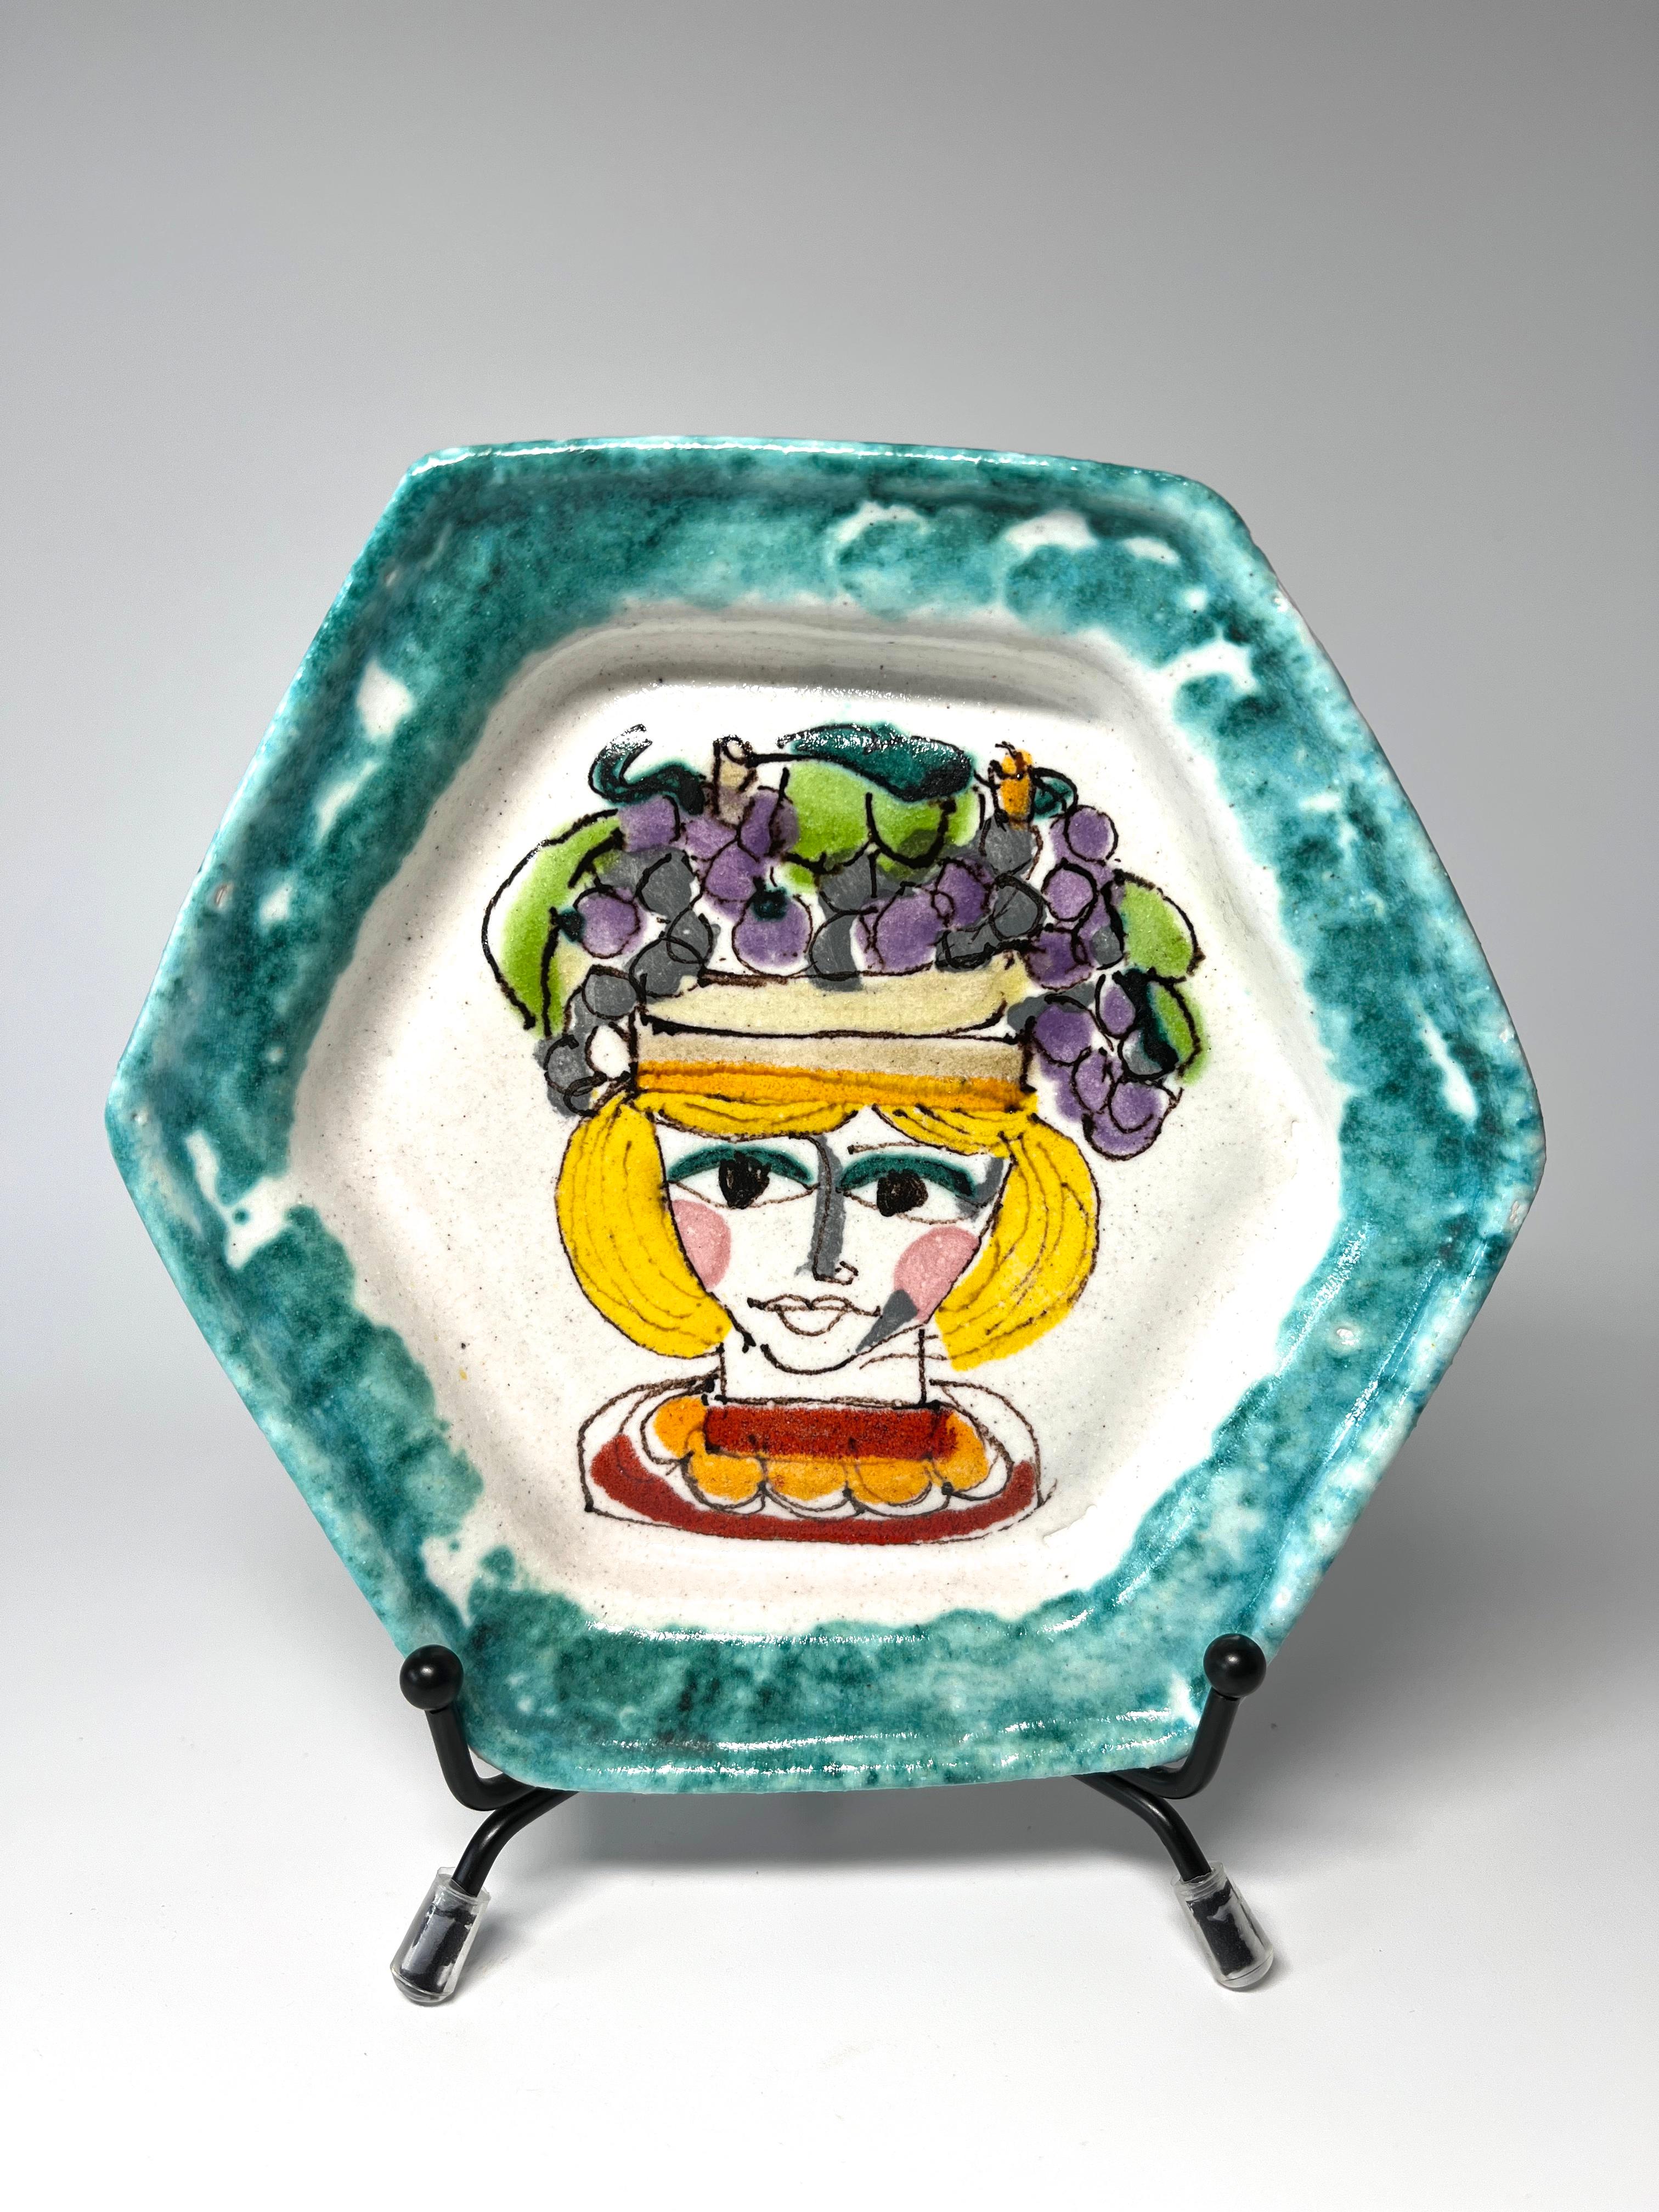 Delightful small hexagonal ceramic plate by DeSimone of Italy
Creatively decorated with a hand painted woman in a grape hat and edged with a sea green stippled rim
Circa 1960's
Signed DeSimone, Italy
Height 0.75 inch, Diameter 5.5 inch
In very good